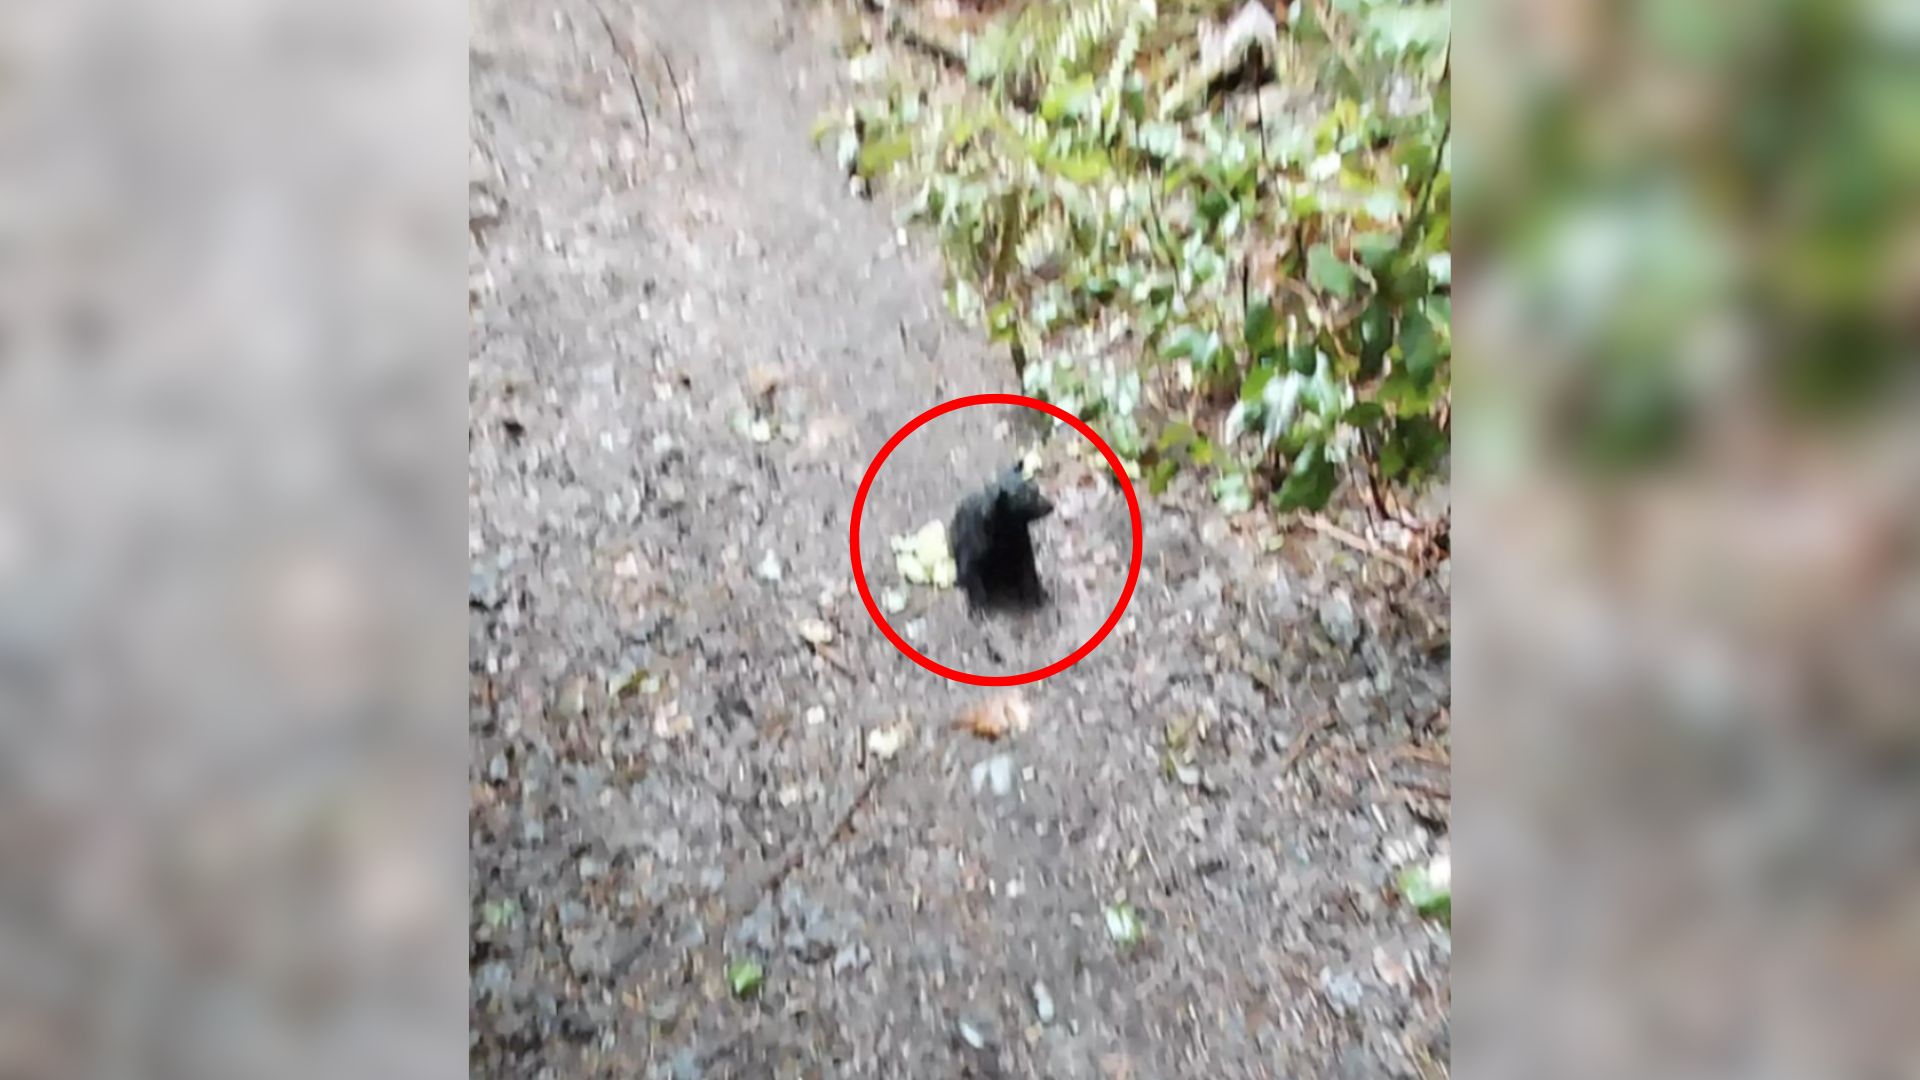 Hiker Finds A Strange Ball Of Black Fuzz All Covered In Mud, Then Learns Its True Identity